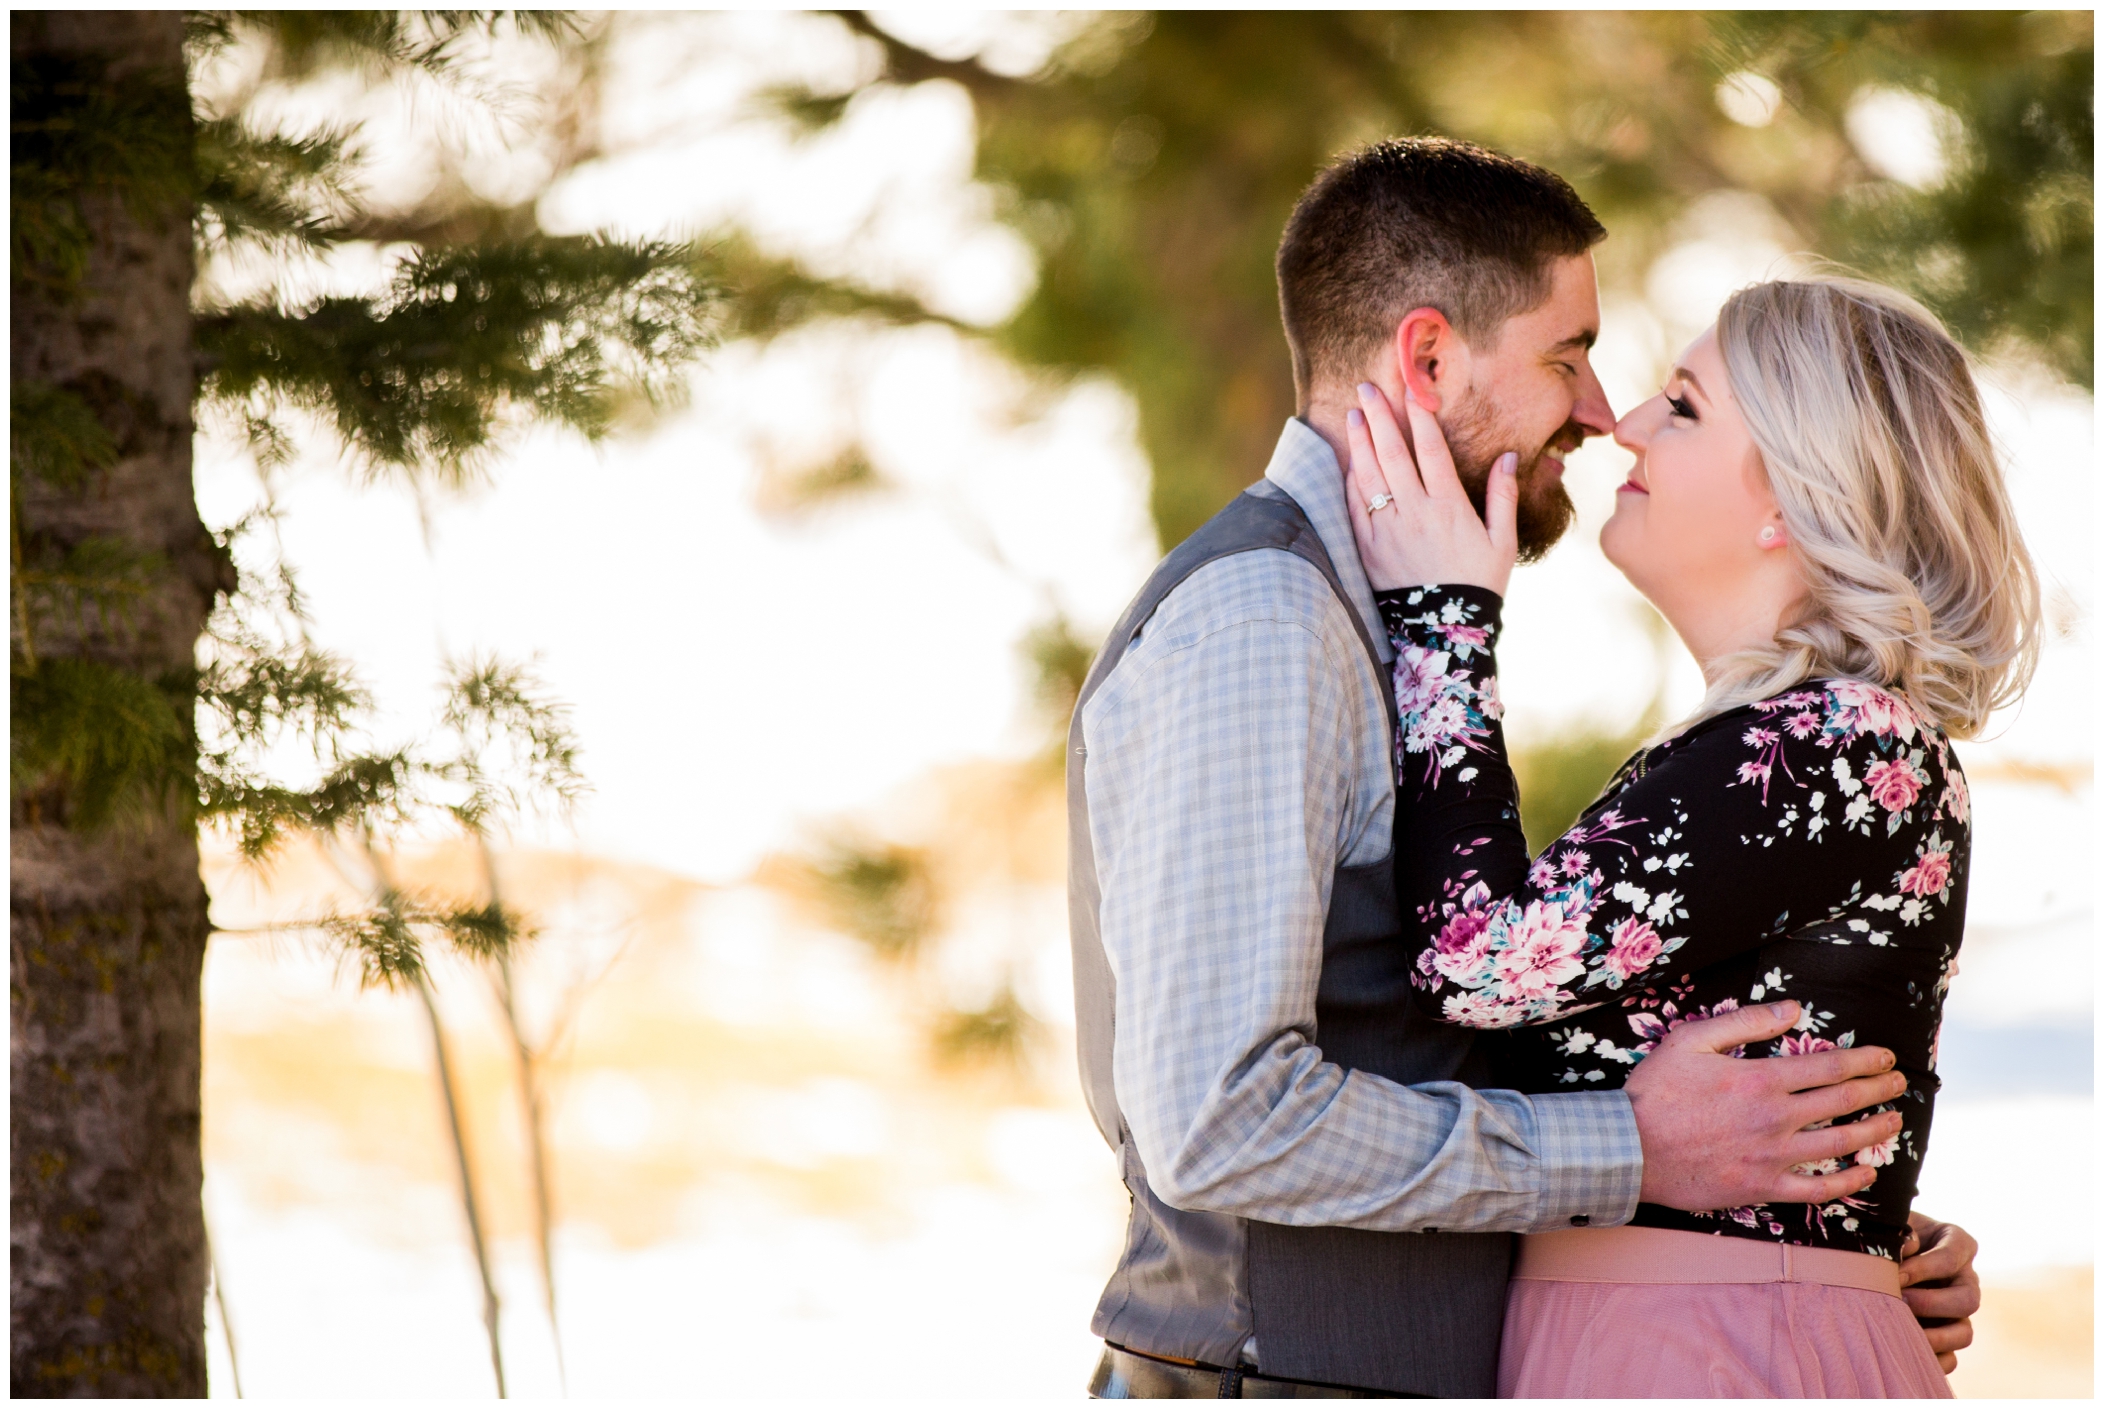 winter engagement photo inspiration by Colorado photographer Plum Pretty Photography 